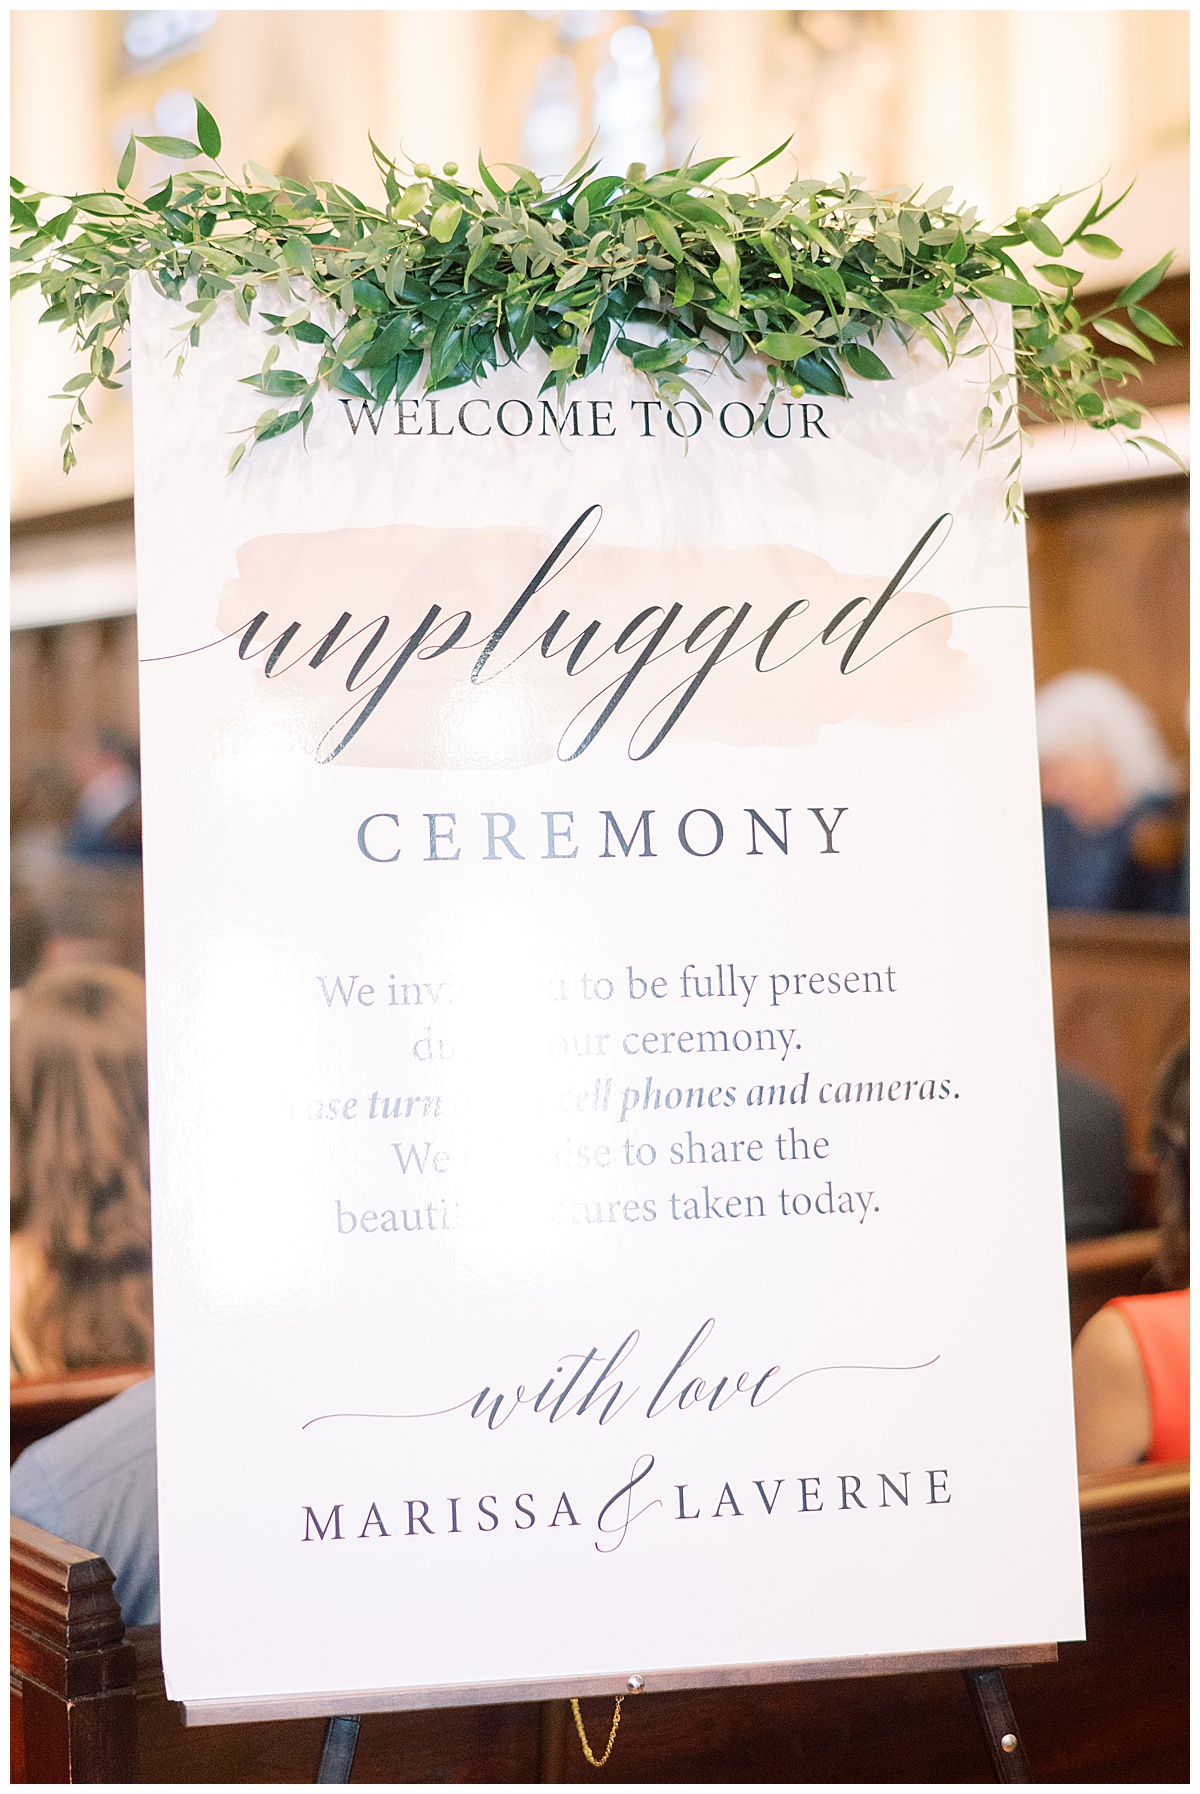 sign of unplugged ceremony